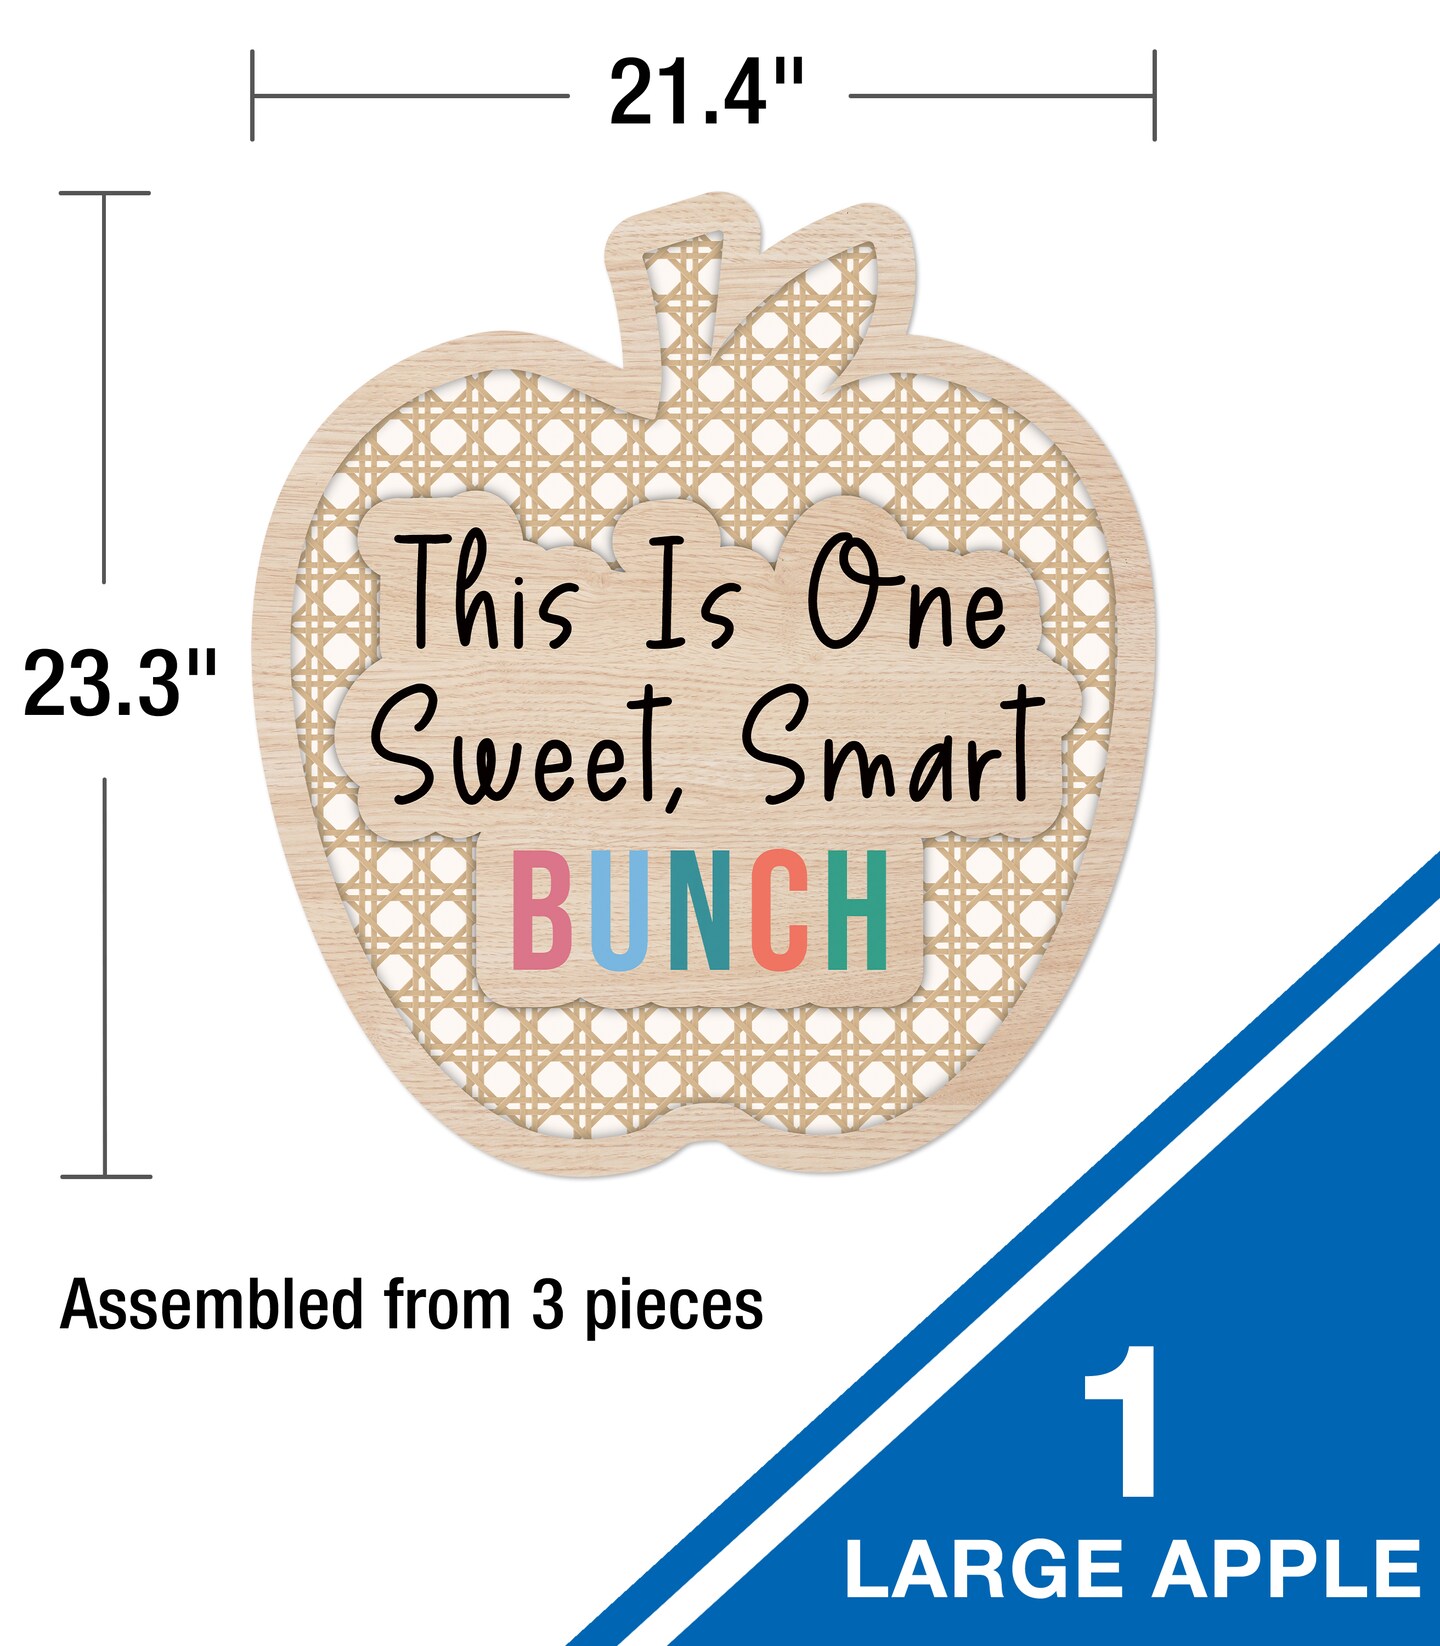 Carson Dellosa True to You 59-Piece This is One Sweet, Smart Bunch Motivational Bulletin Board Set, Heart and Apple Modern D&#xE9;cor for Bulletin Board, Cork Board, and Natural Classroom Decor